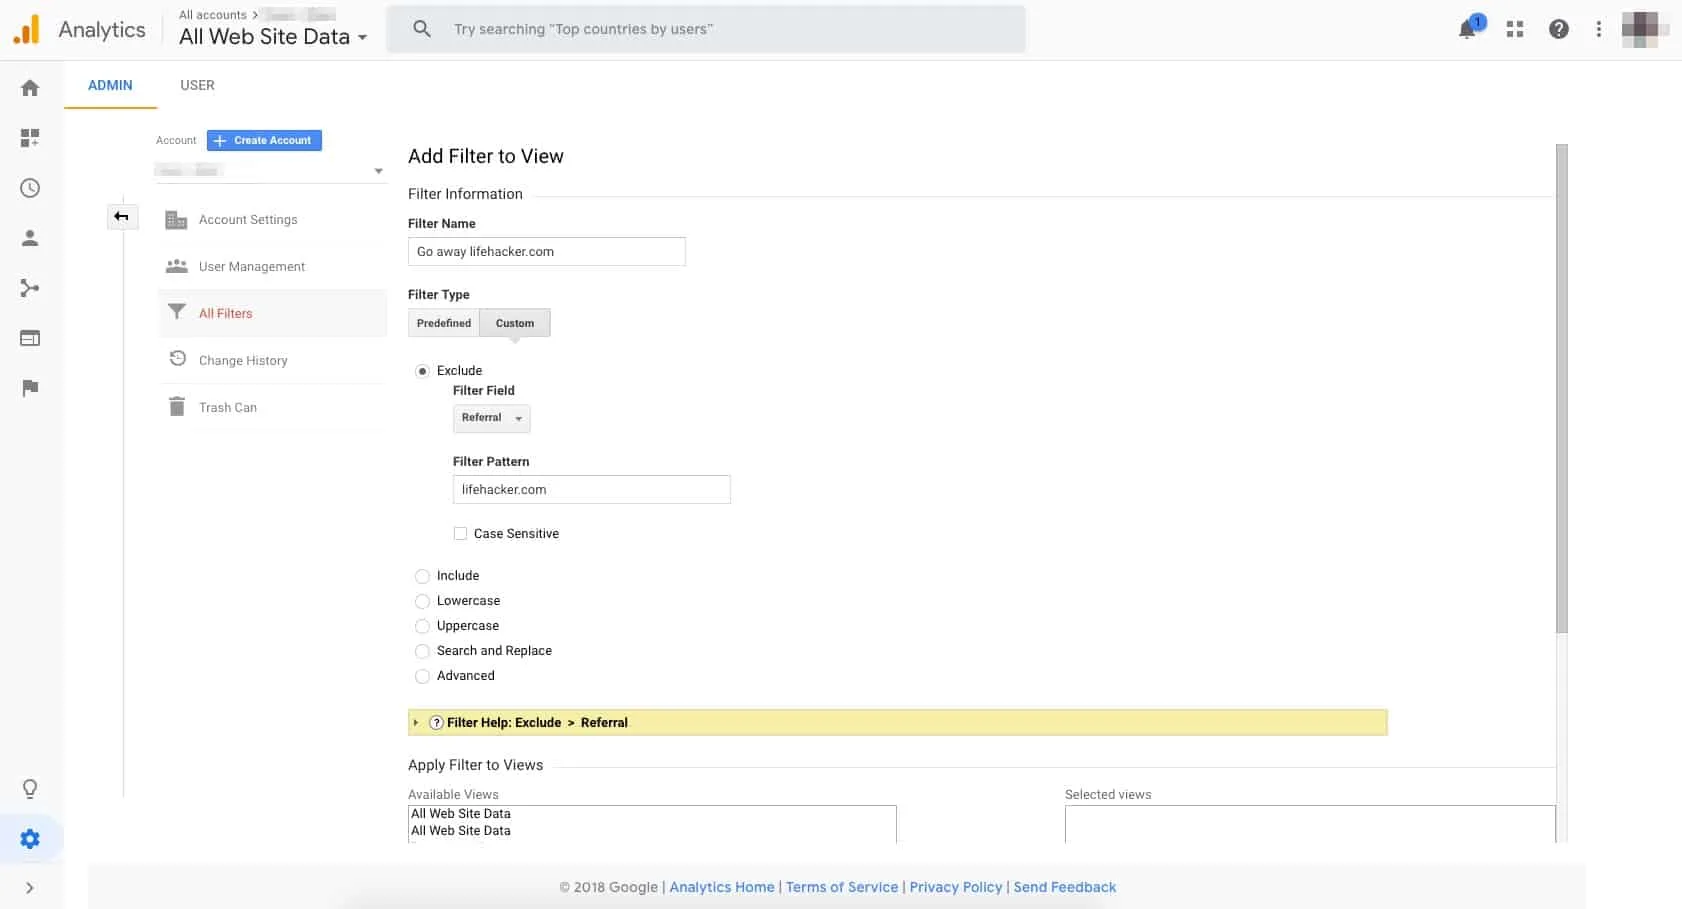 A screen capture of the Google Analytics admin portal, showing a detailed view of adding a filter.